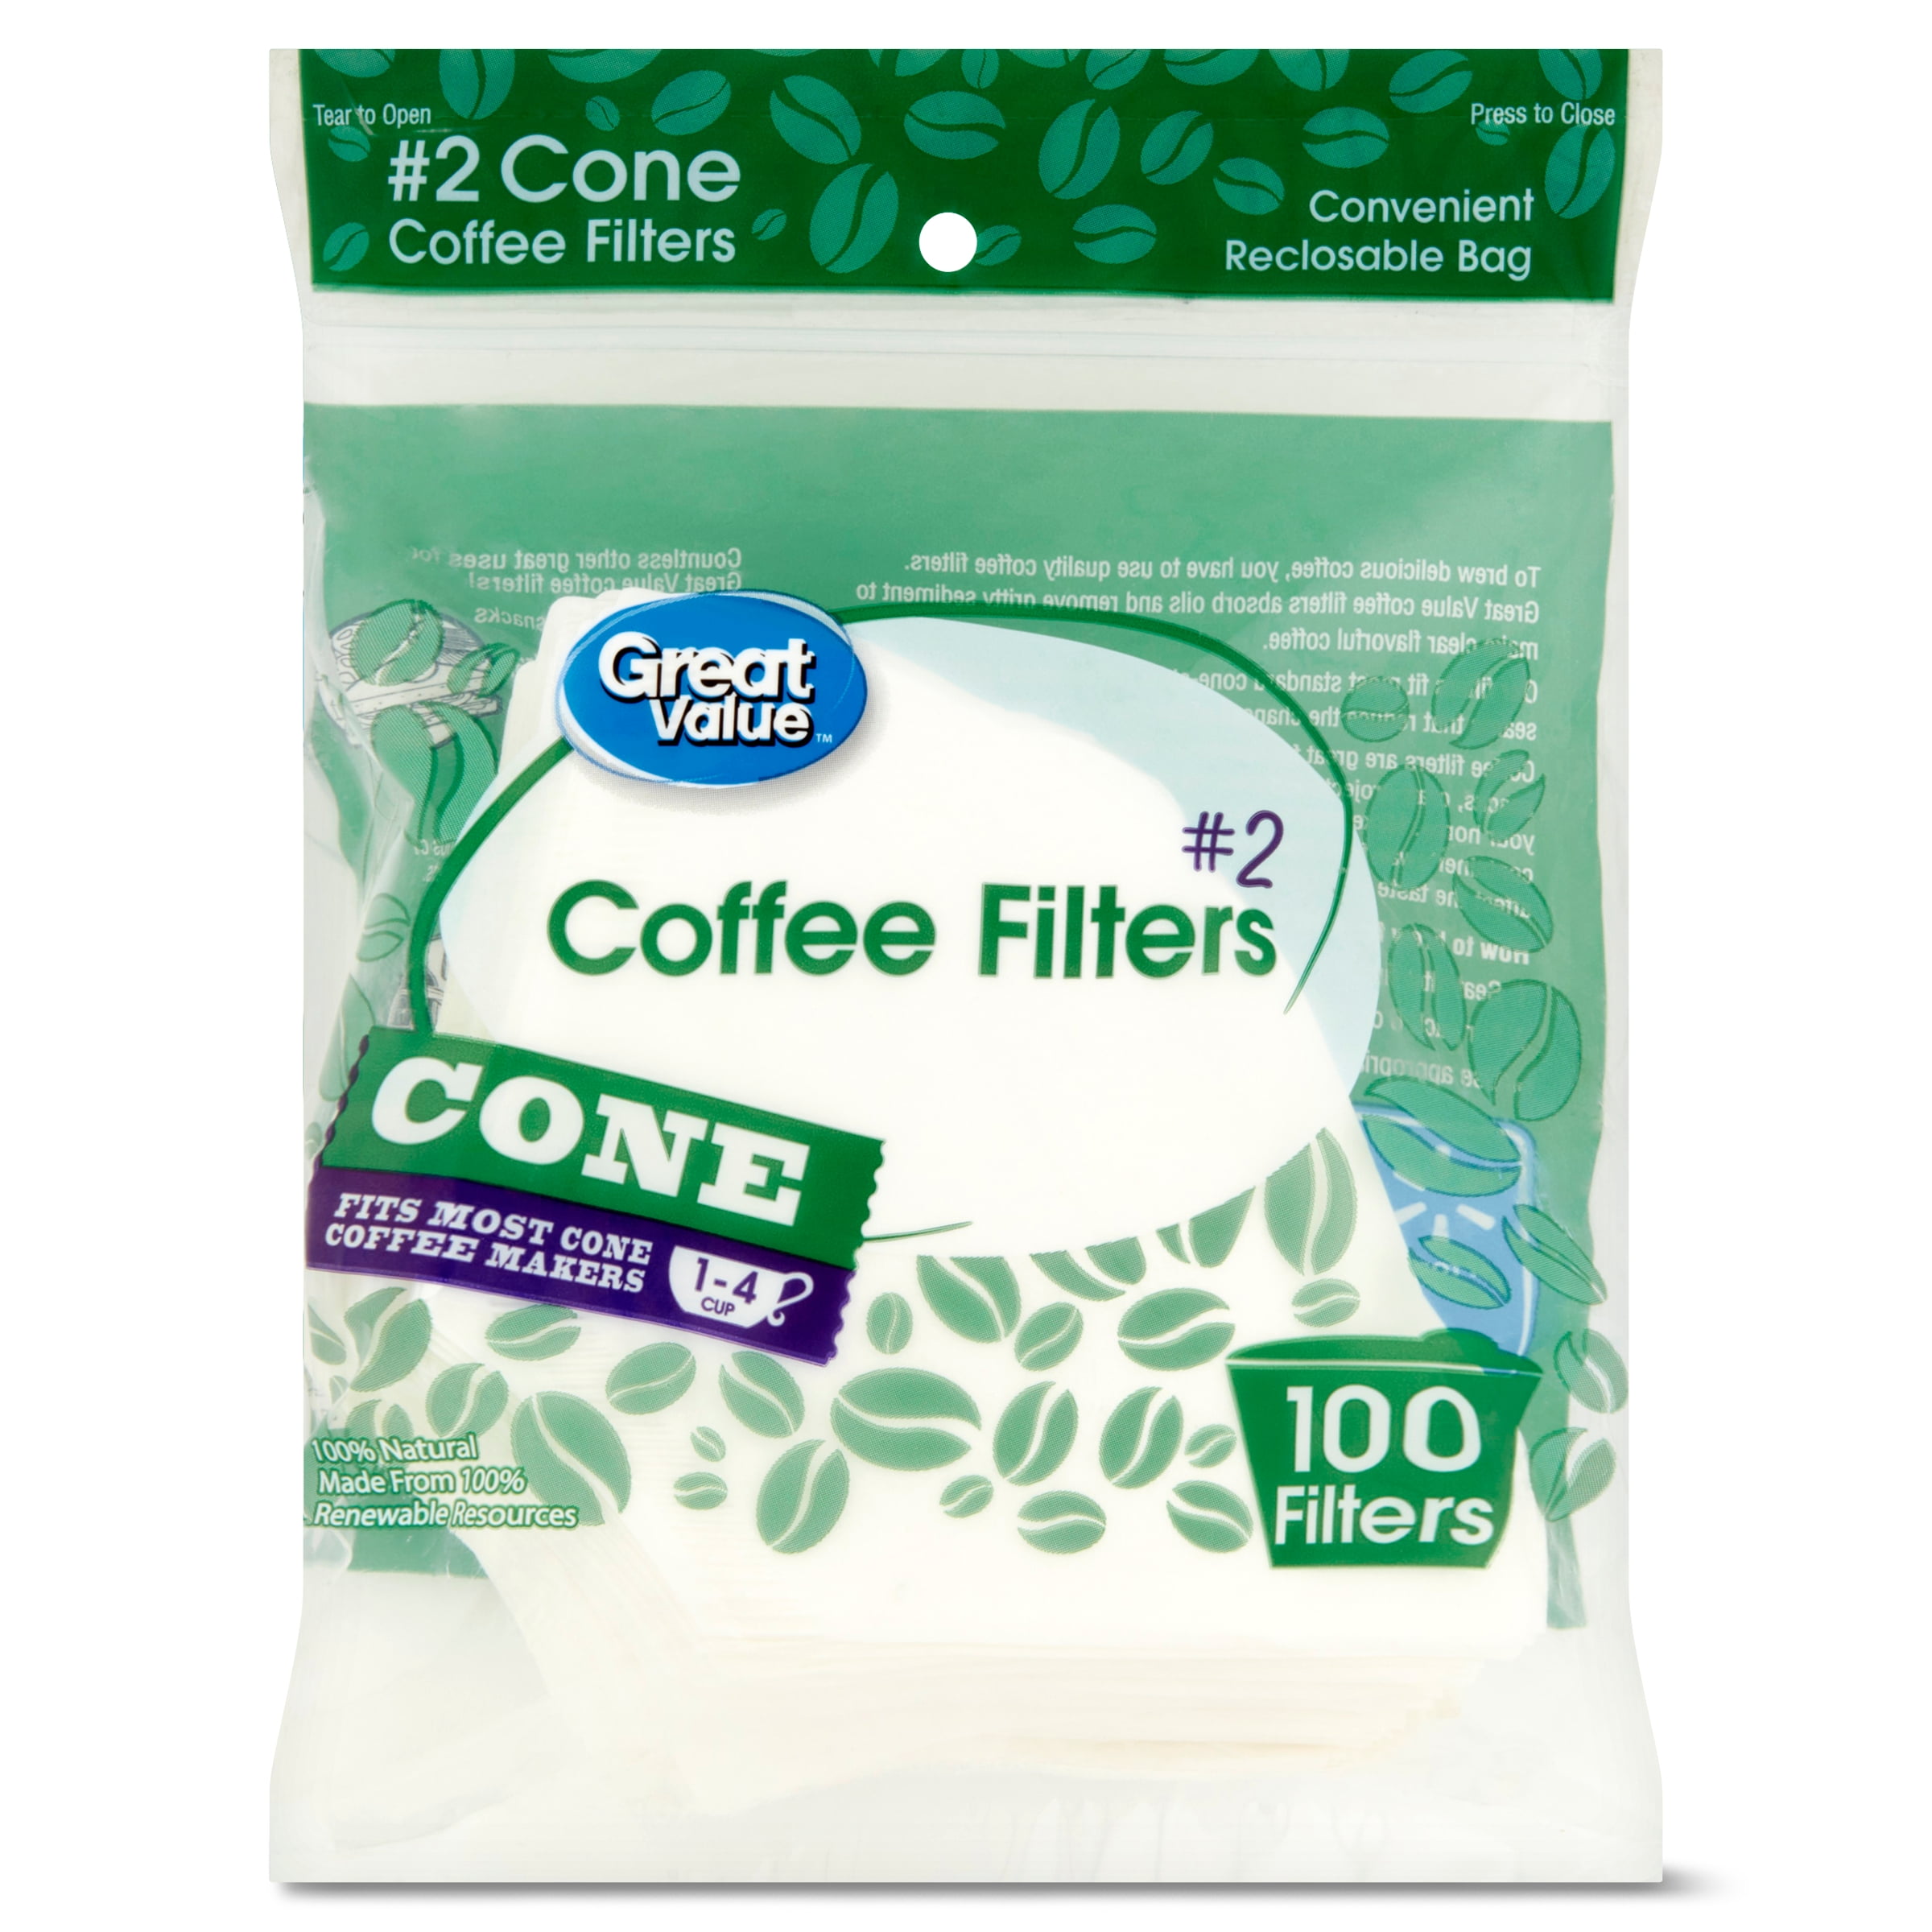 Great Value #2 Cone Coffee Filters, 100 count